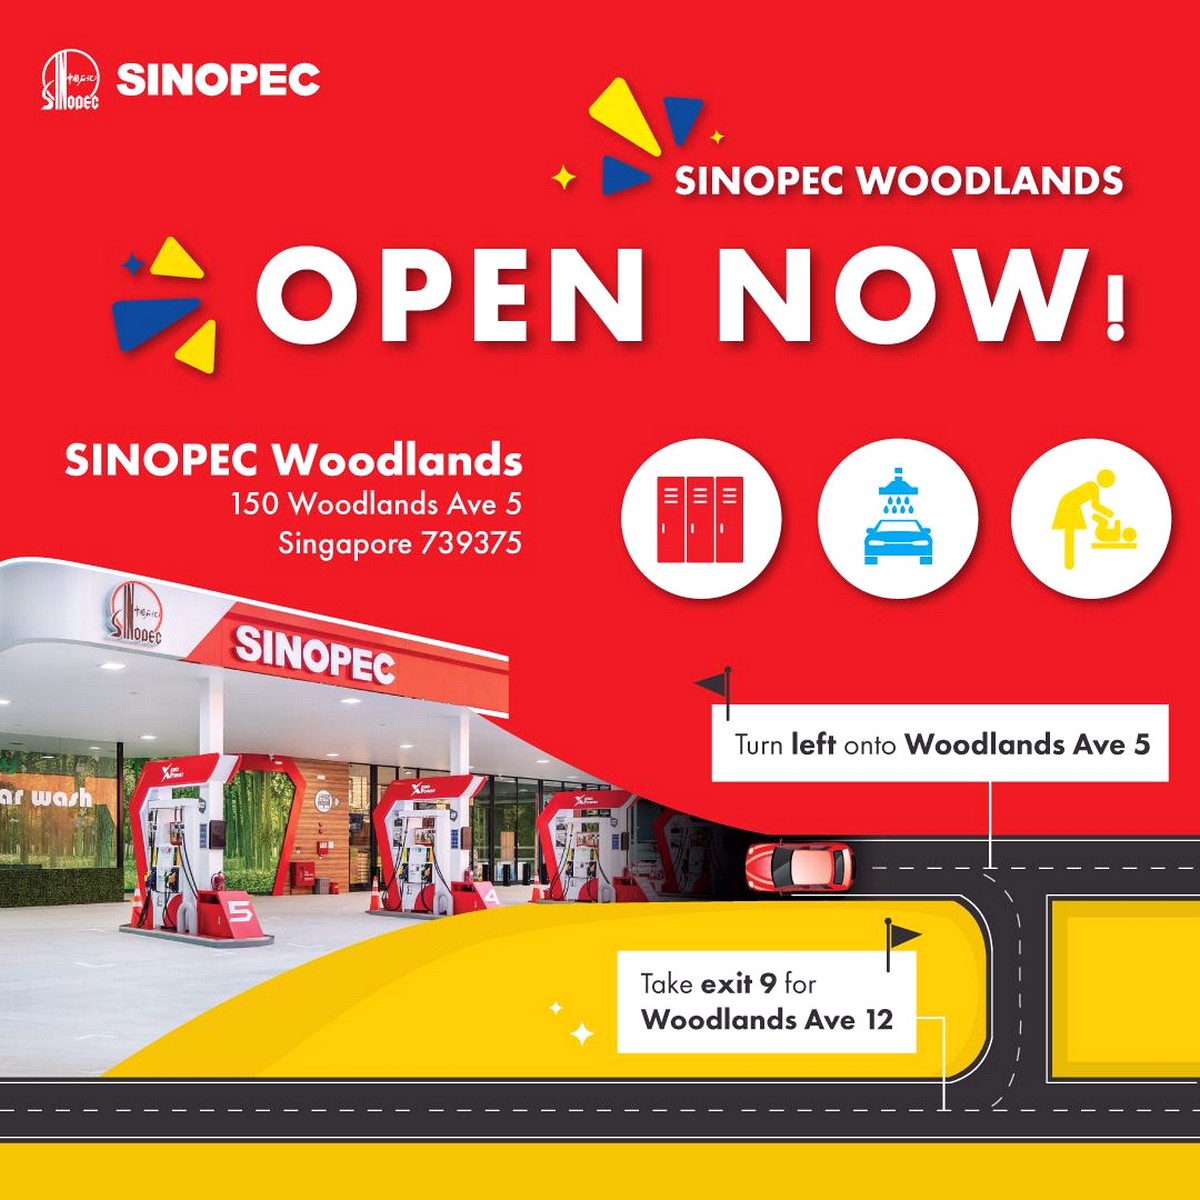 Sinopec-Opening-Promotion-woodlands-2021-Singapore-Petrol-Offers-003 21 May-3 Jun 2021: Sinopec at Woodlands New Petrol station Promotion! 21% OFF Instant opening Exceptional Rebate on their Opening Offers